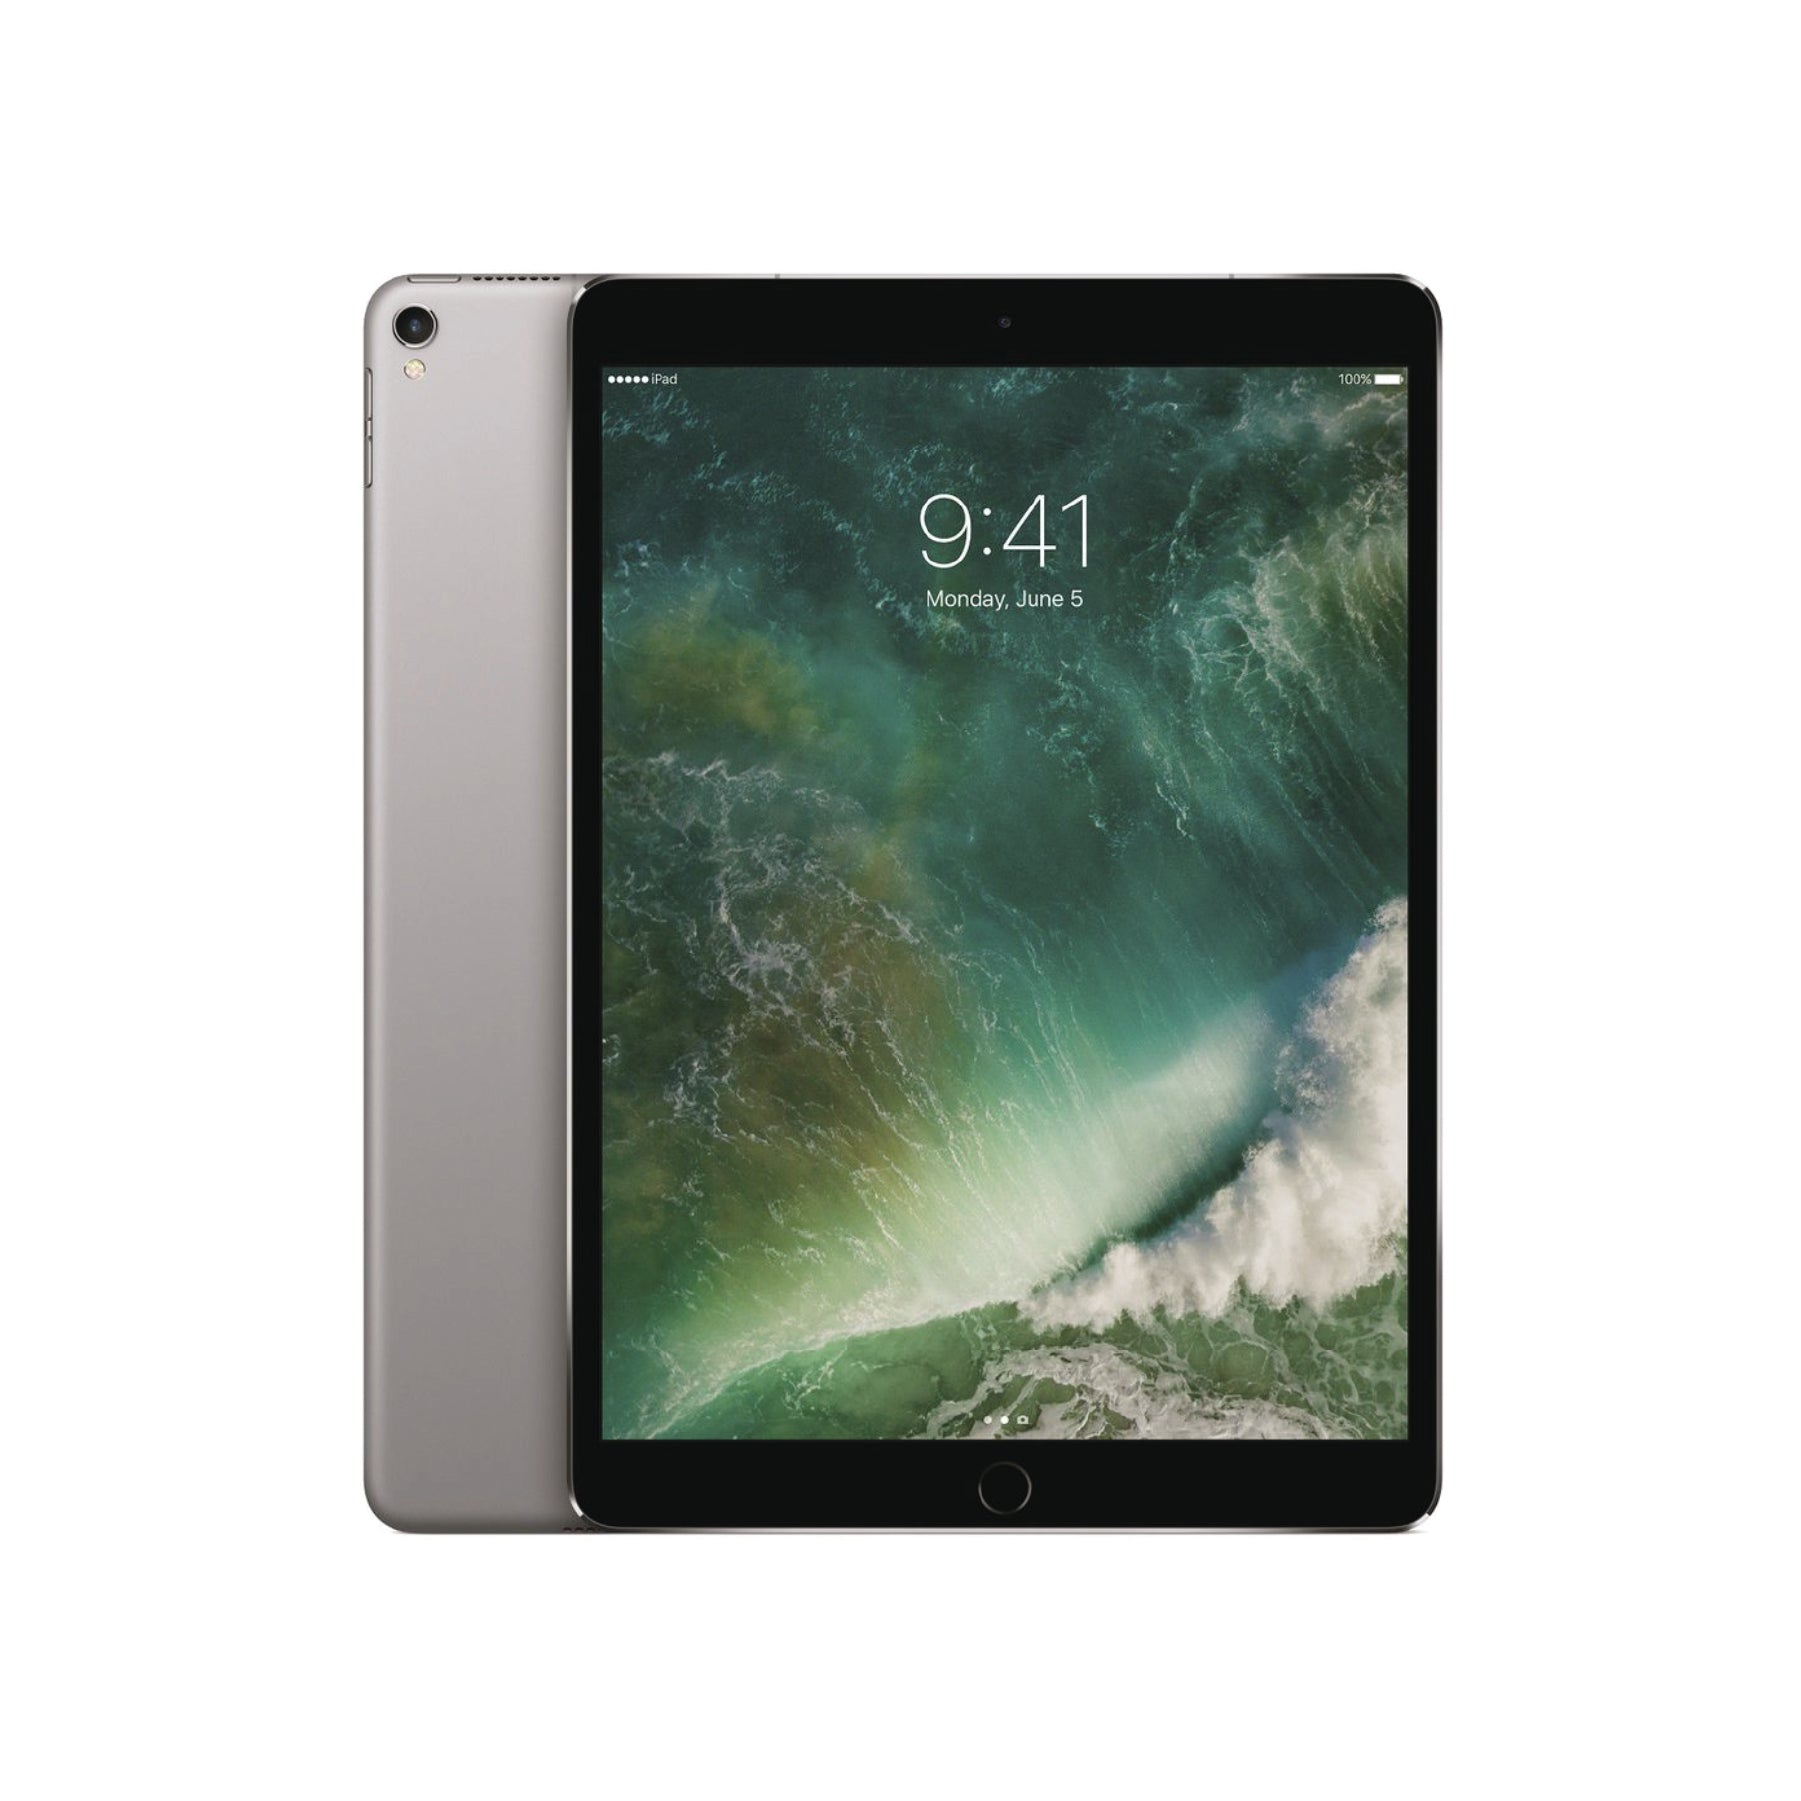 iPad Pro (10.5-inch, 2017) Wi-Fi + Cellular 512GB -Space Grey (Good) - iStore Pre-owned